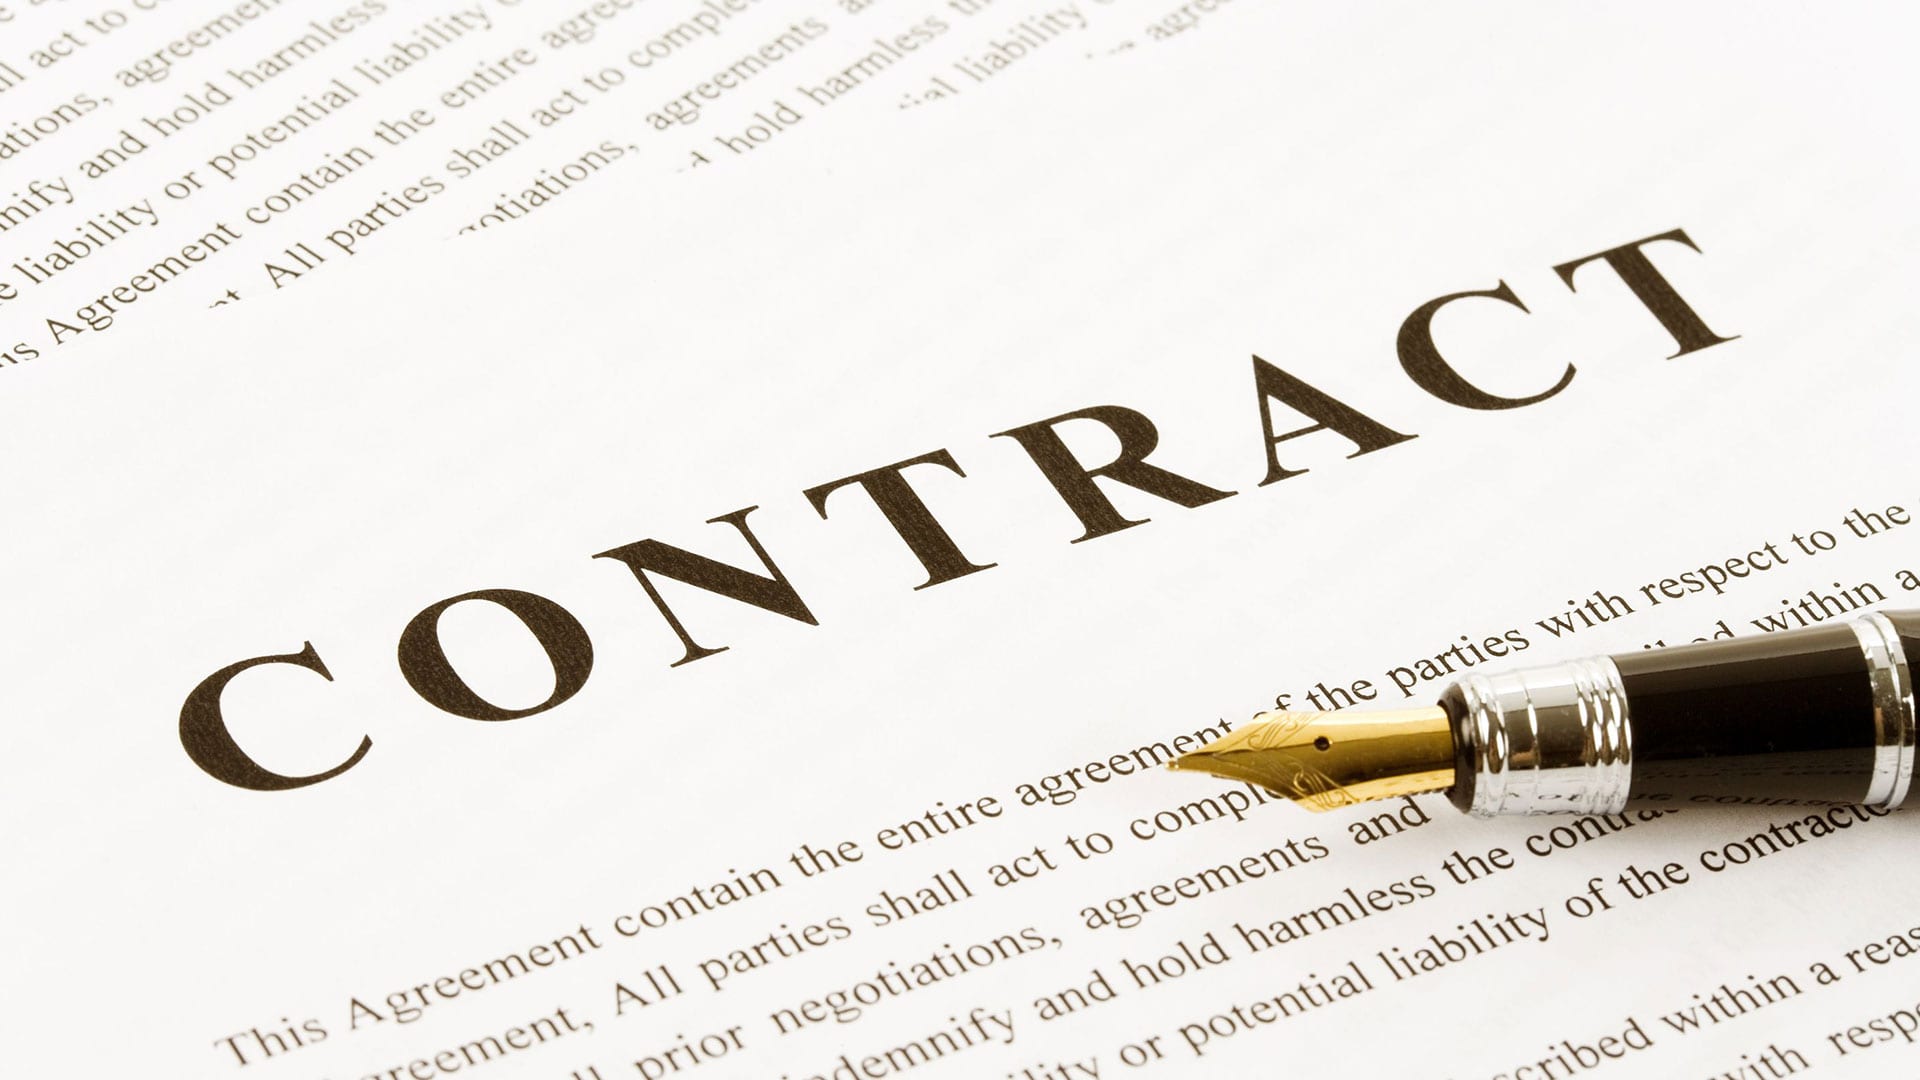 Contract Management by SIT Corporation